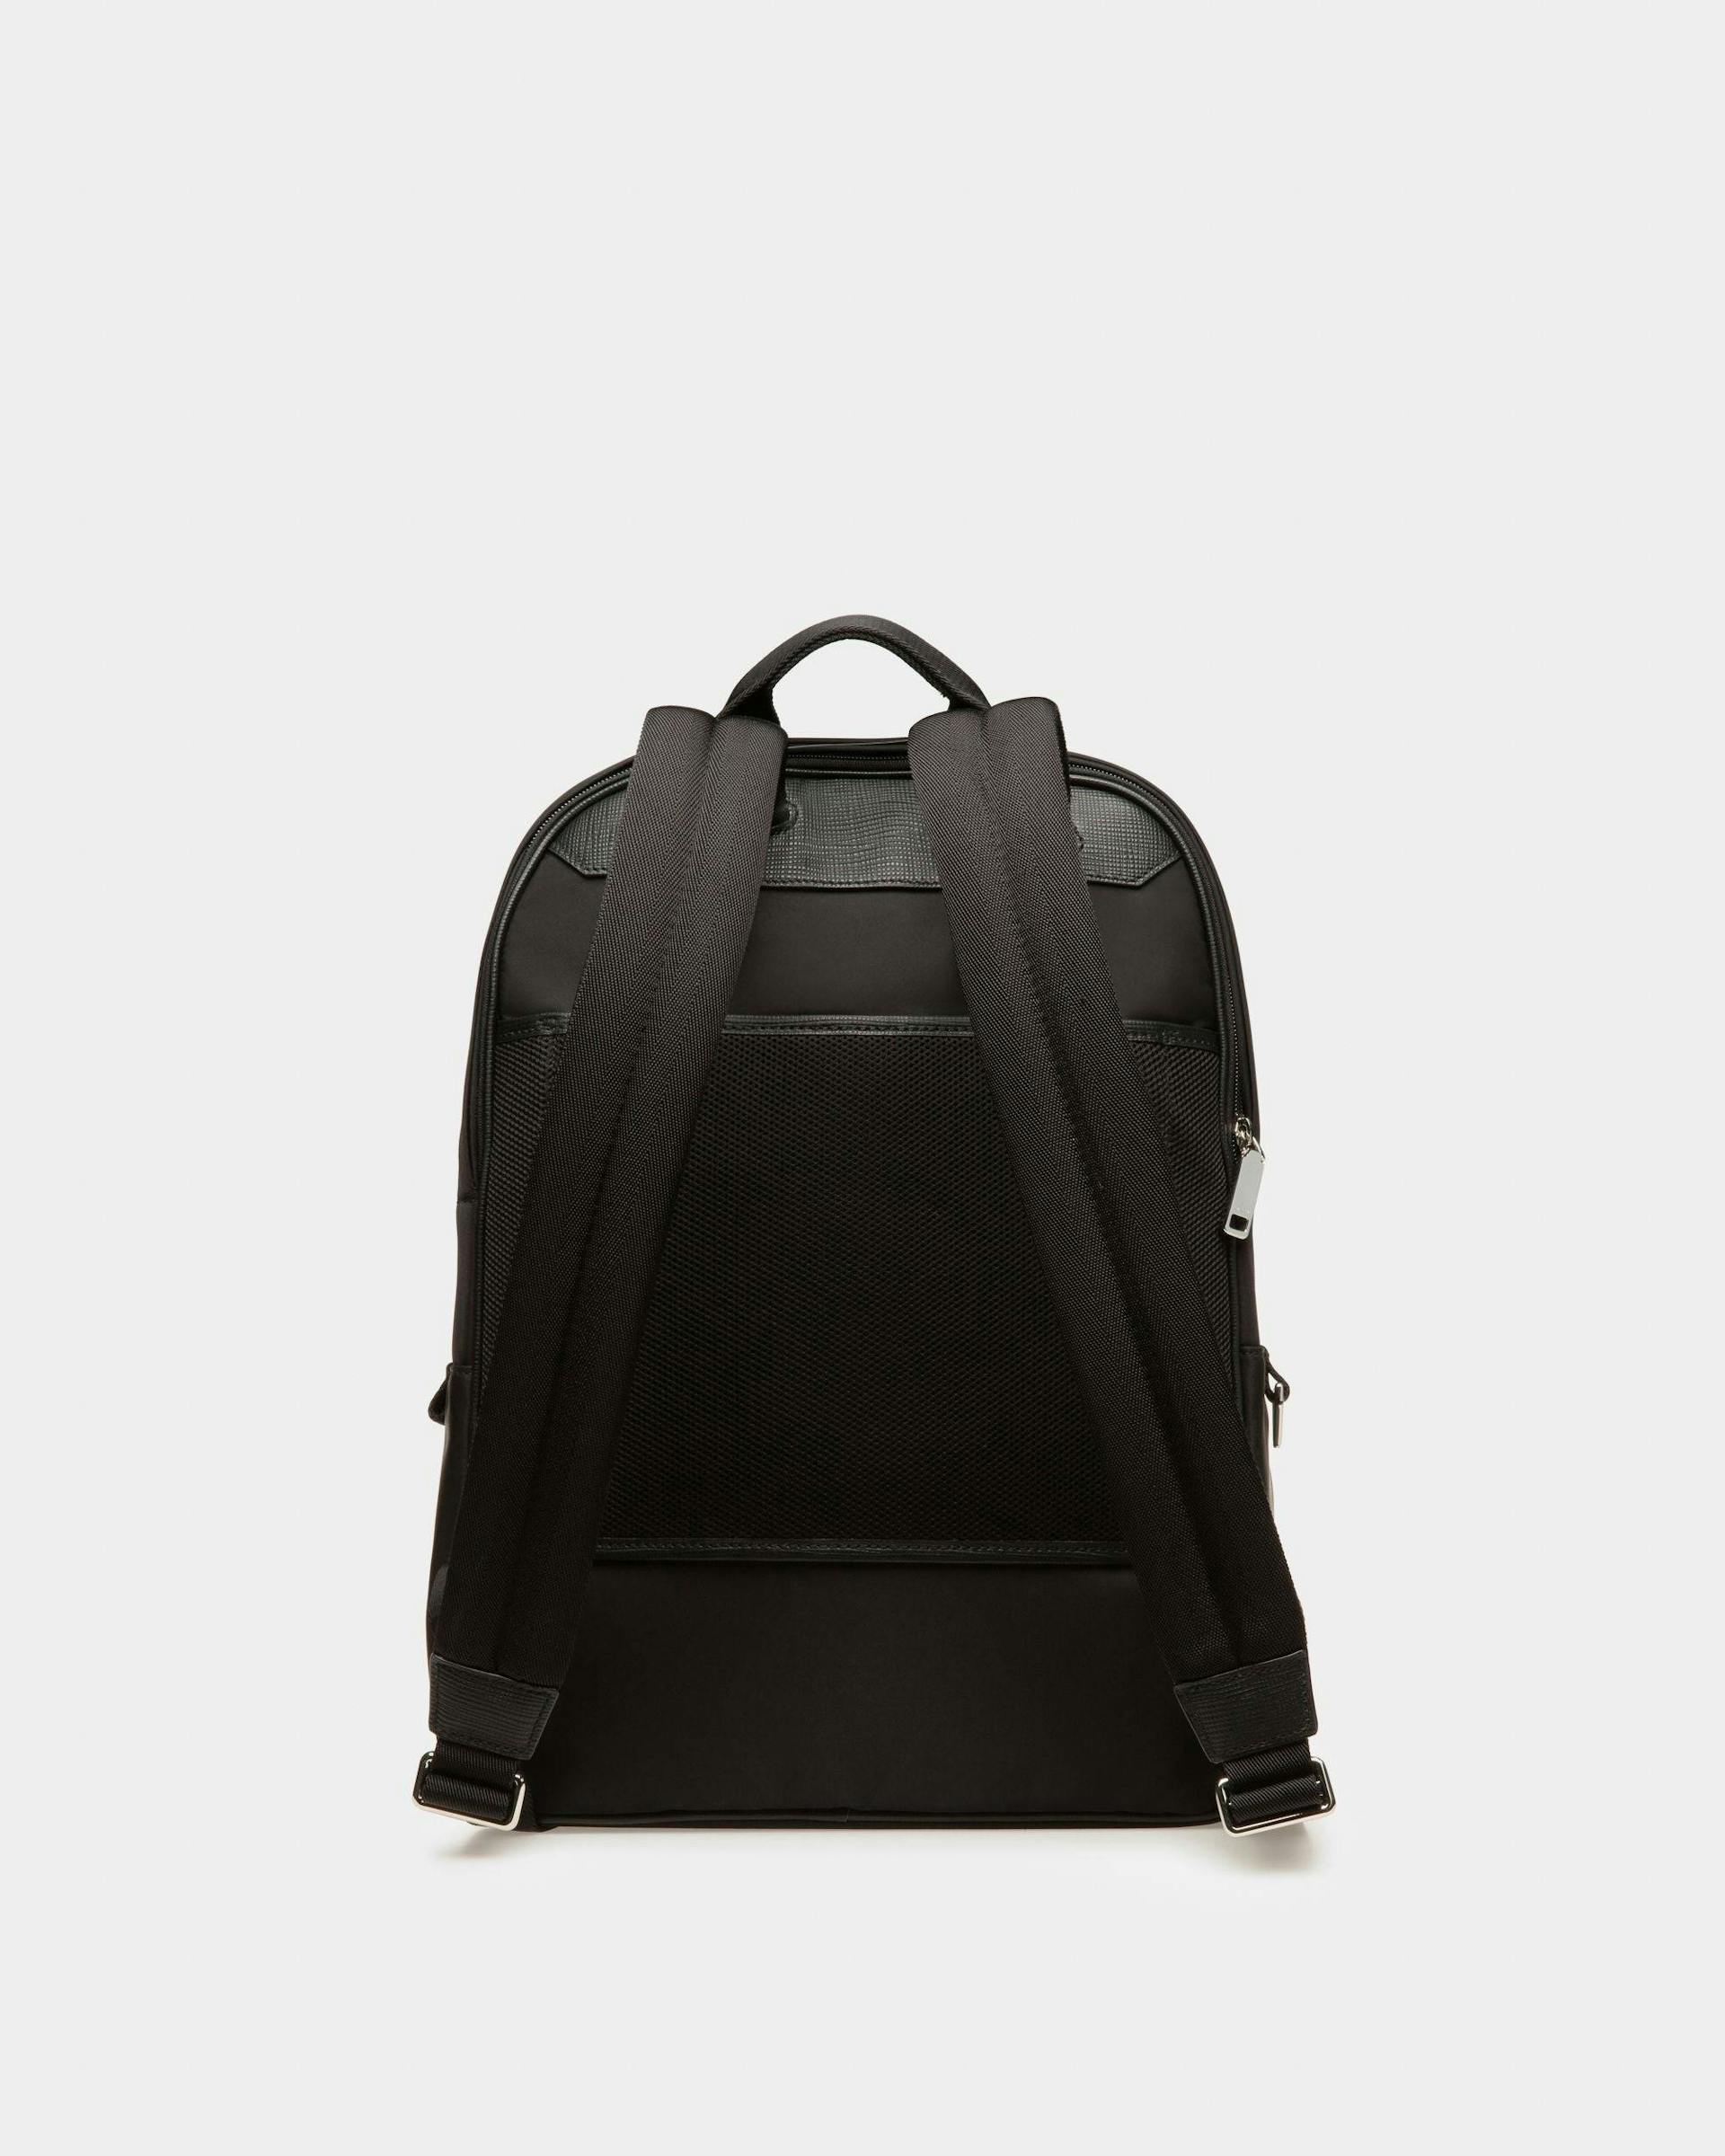 Men's Explore Backpack In Black Leather And Nylon | Bally | Still Life Back